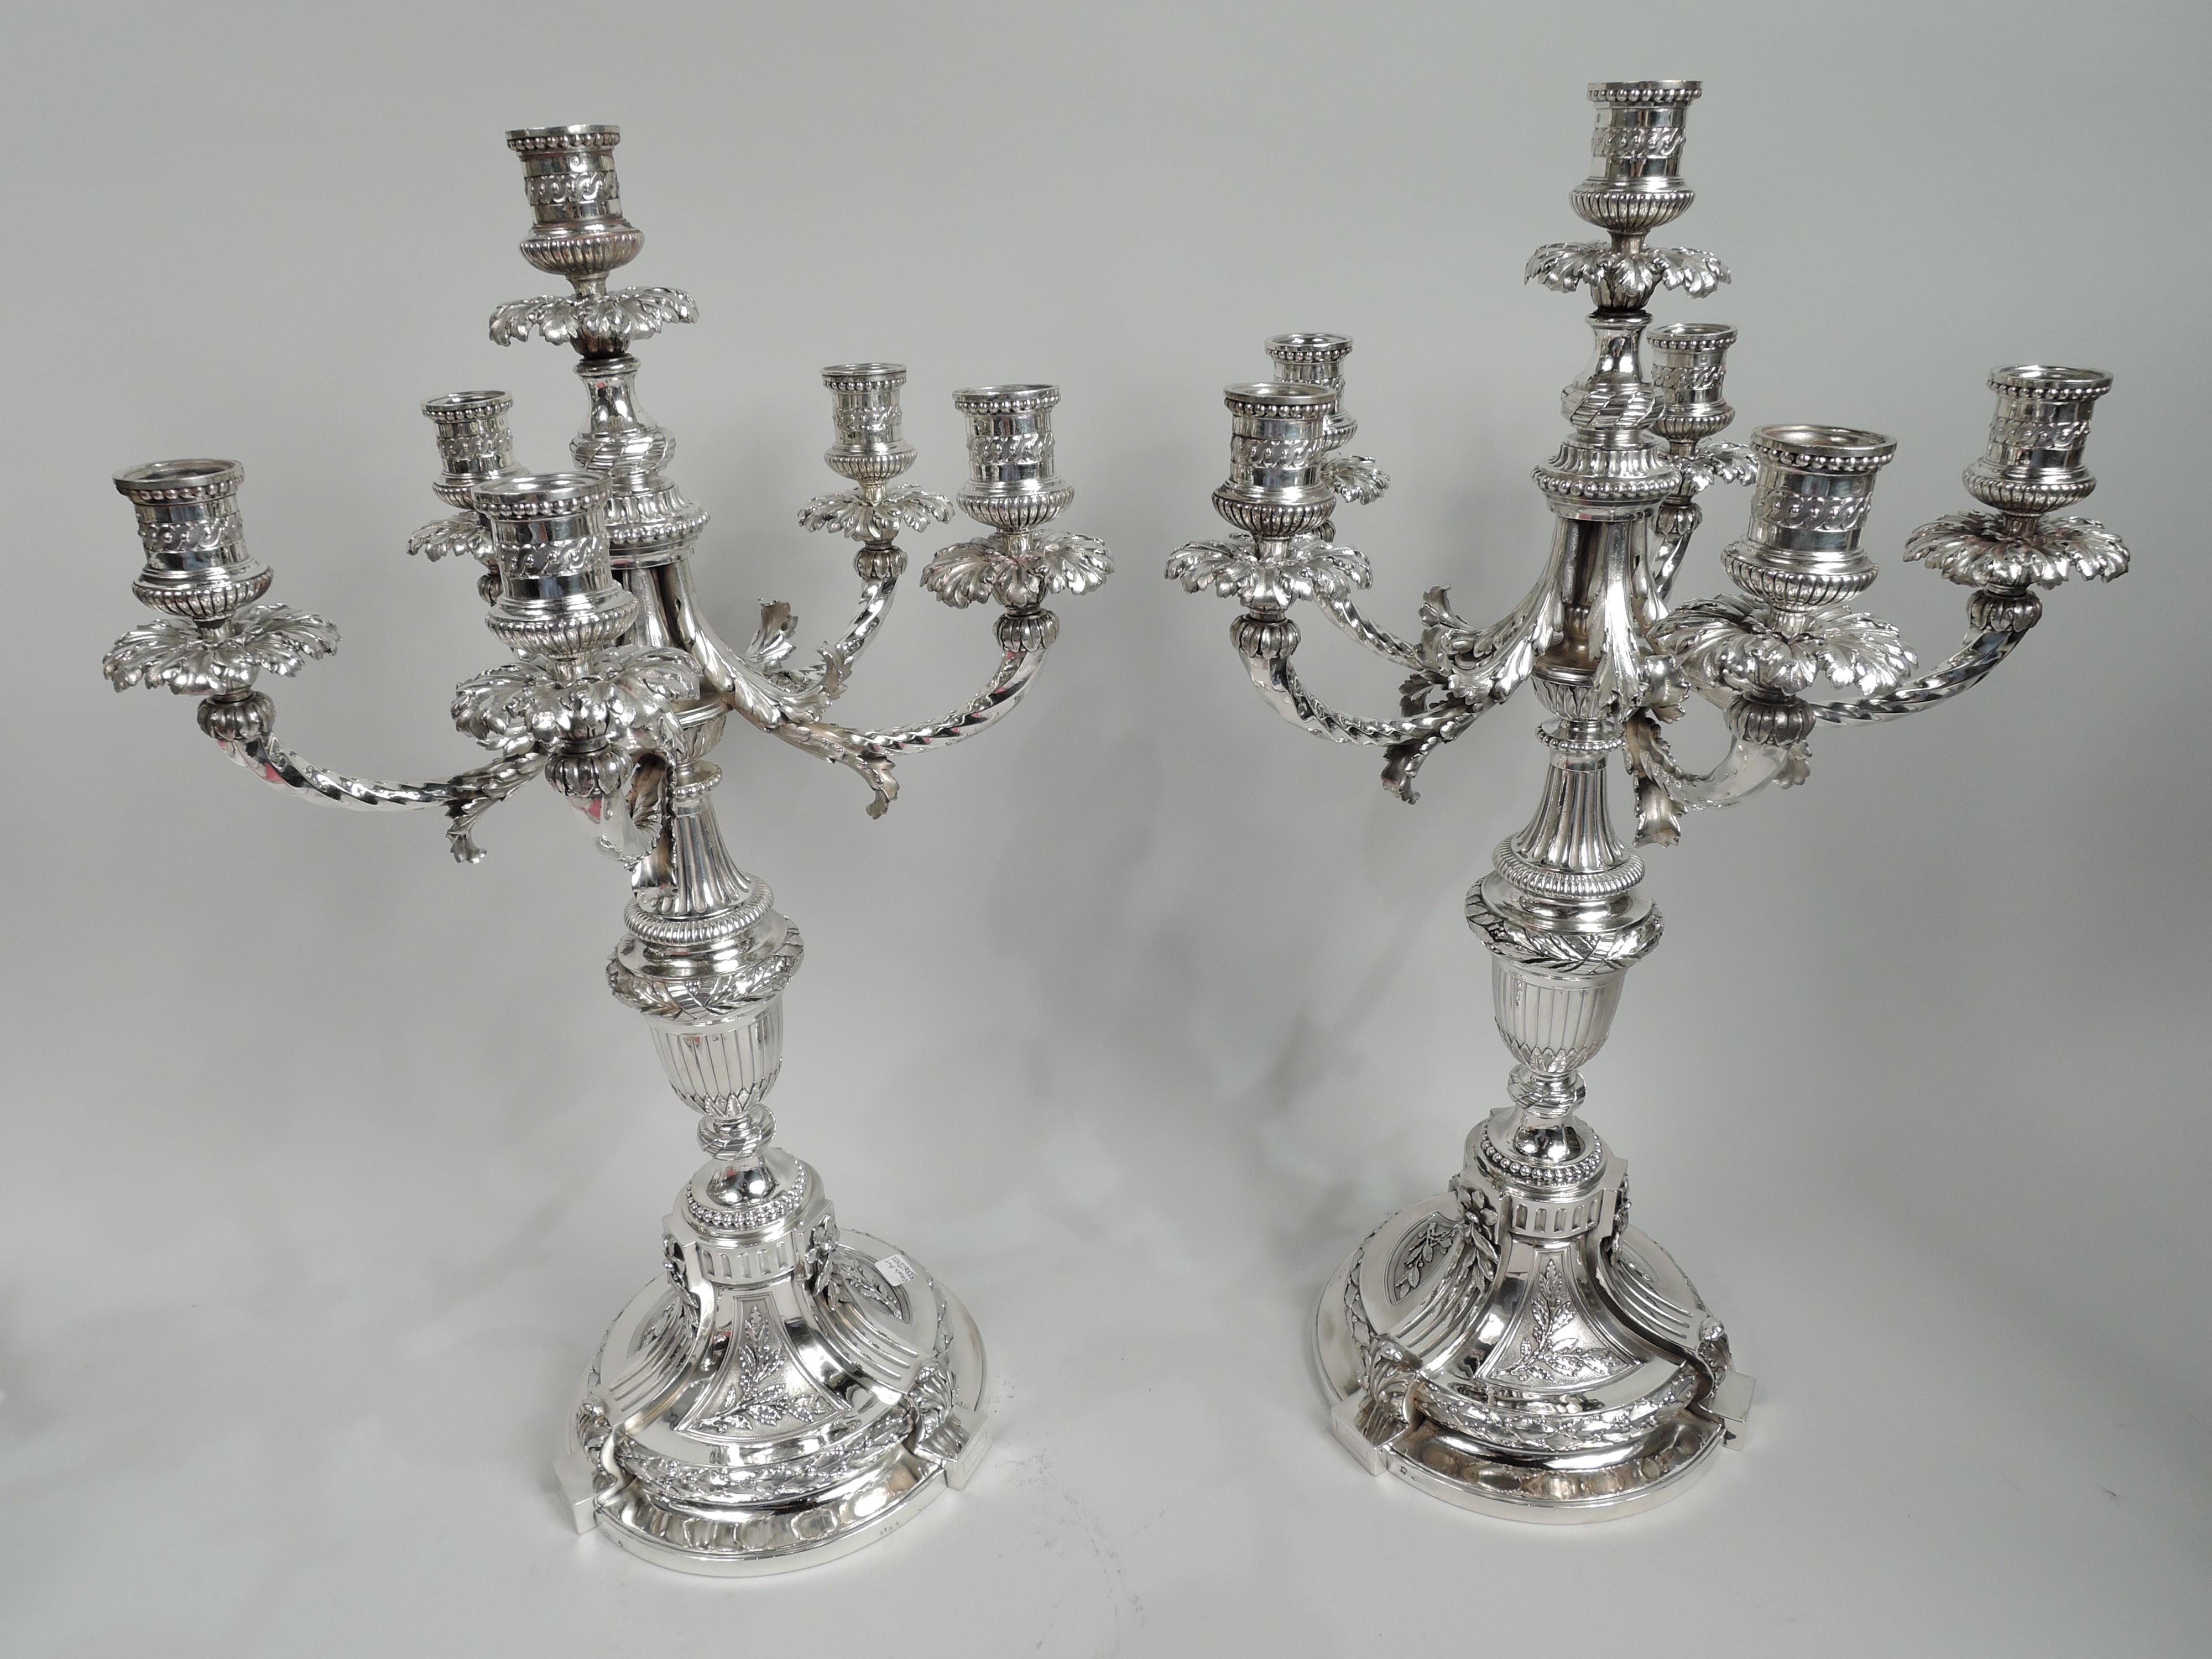 Pair of Belle Epoque neoclassical 950 silver 5-light candelabra. Made by Robert Linzeler & Cie in Paris, ca 1910. Each: Central raised socket four arms each terminating in single socket. Sockets have bellied and gadrooned bottom, guilloche border,